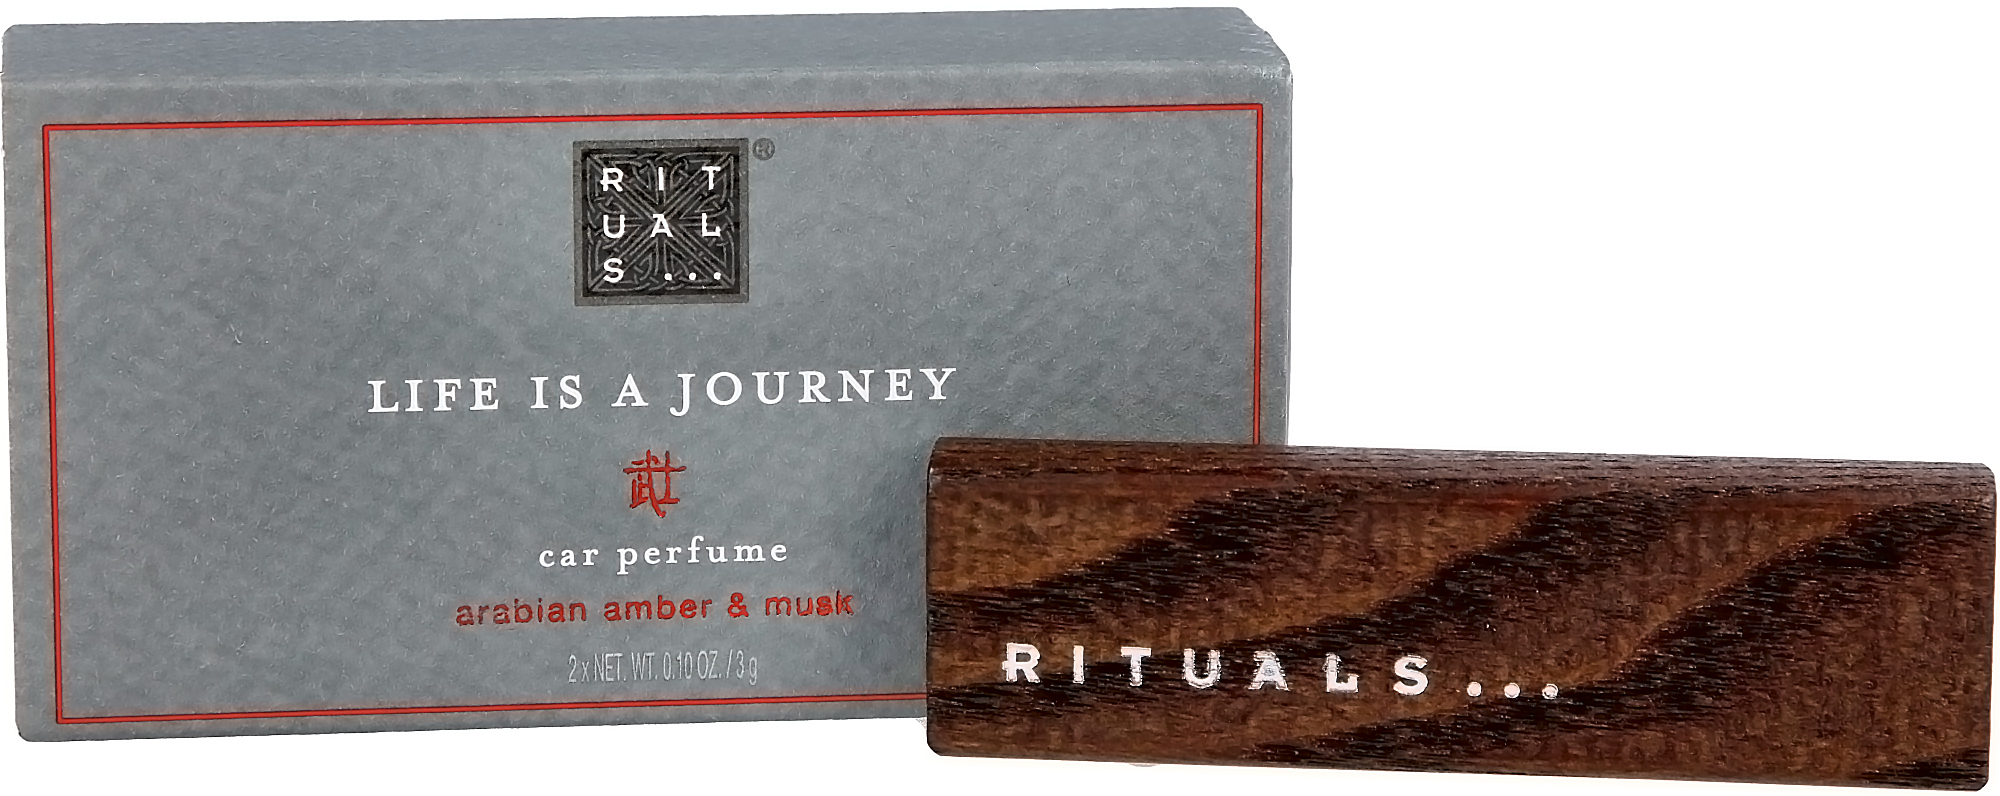 Rituals Home Fragrance Life is a Journey Car Perfume